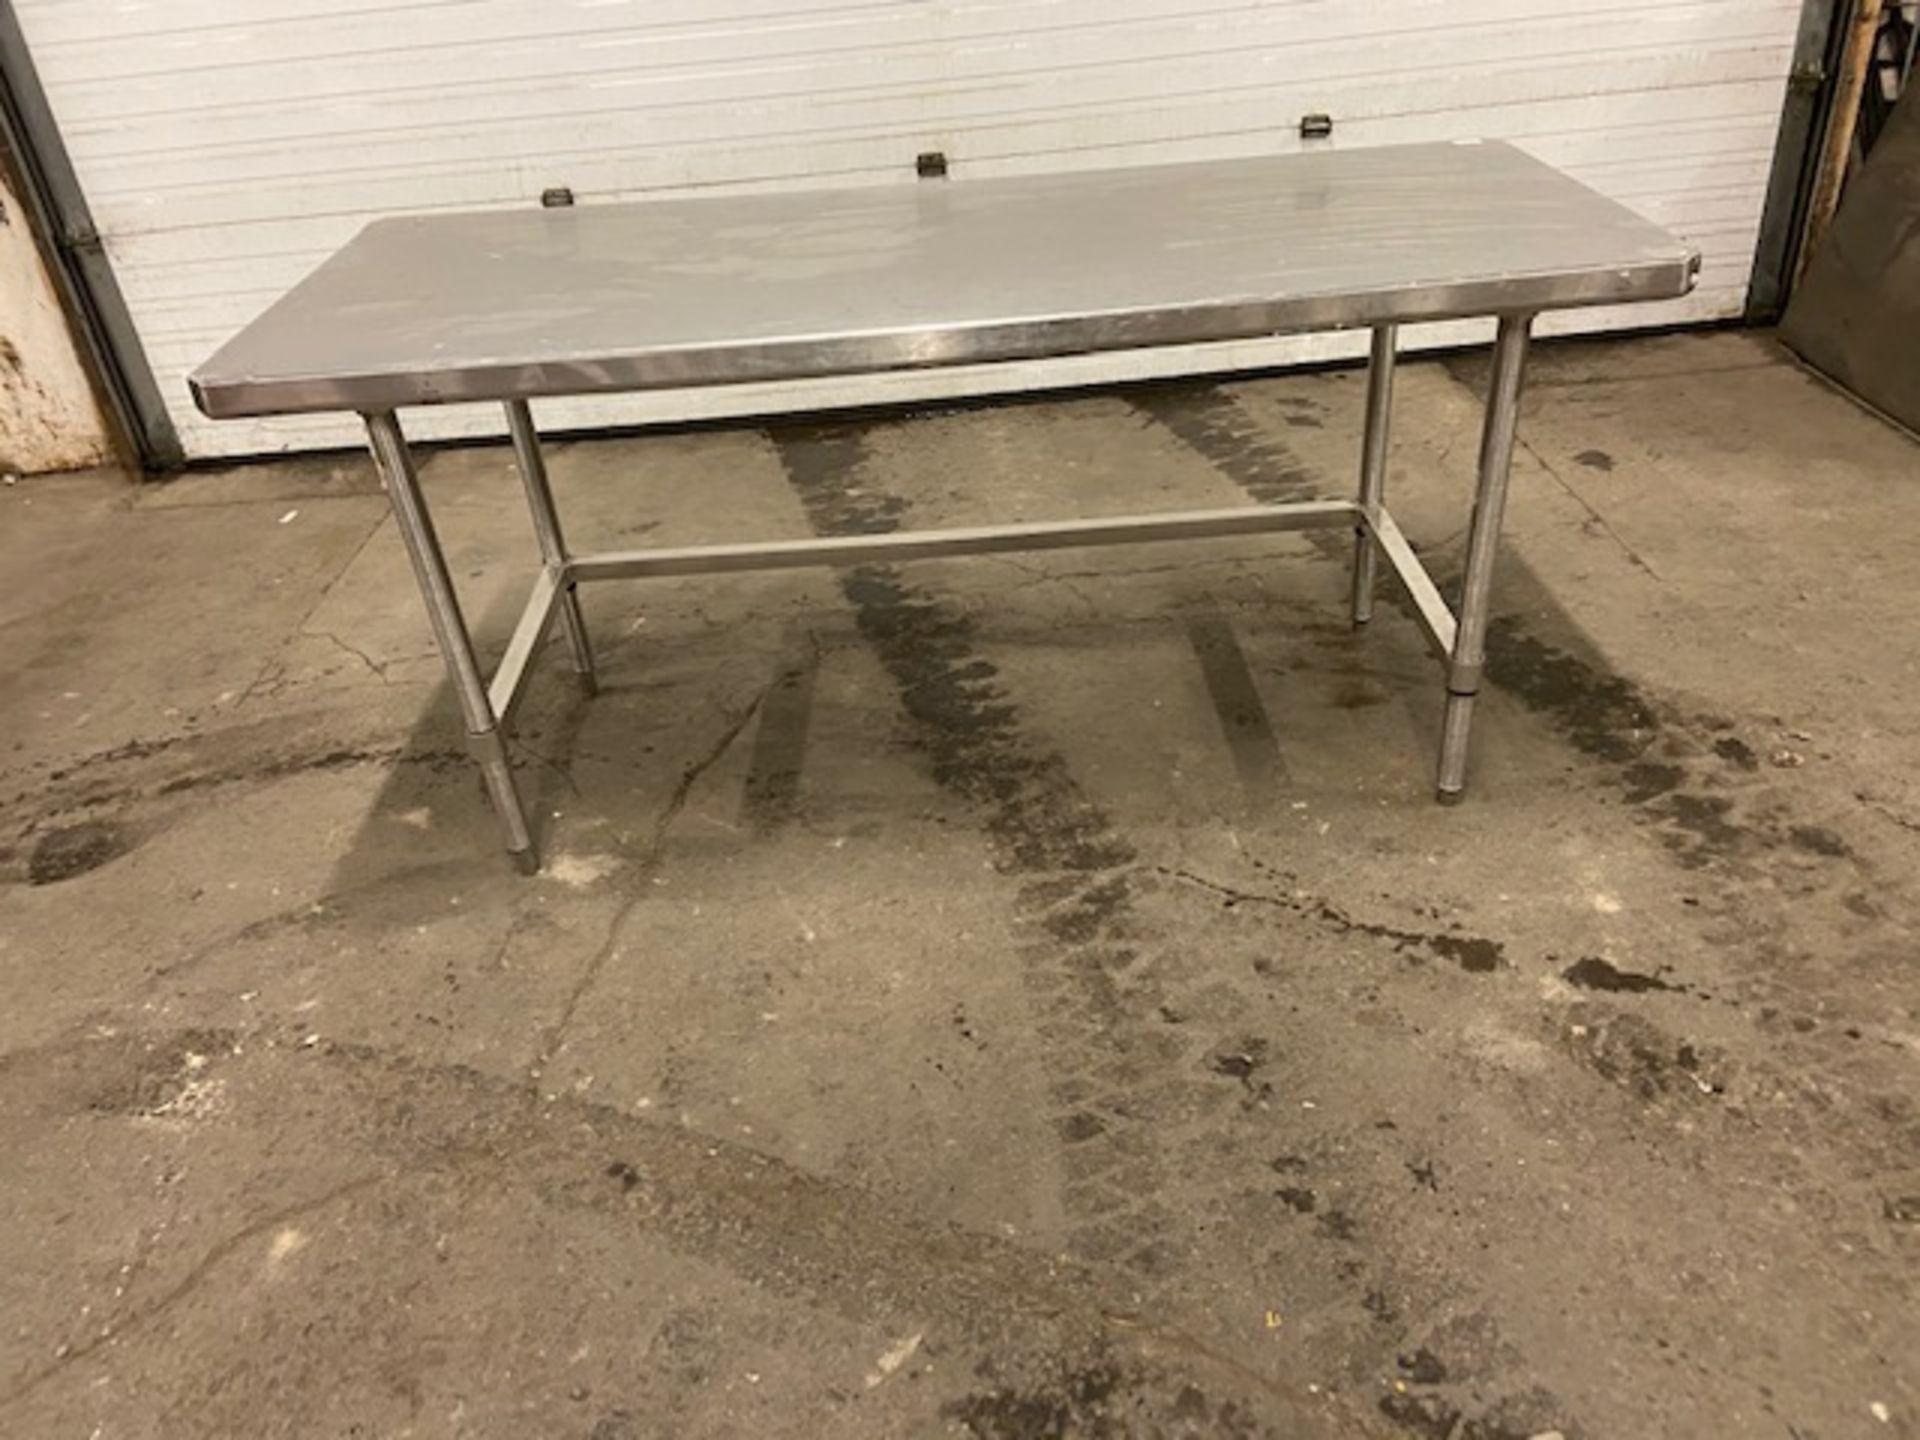 Work Table Work Bench Unit 72" x 30" with Stainless Steel Table Top